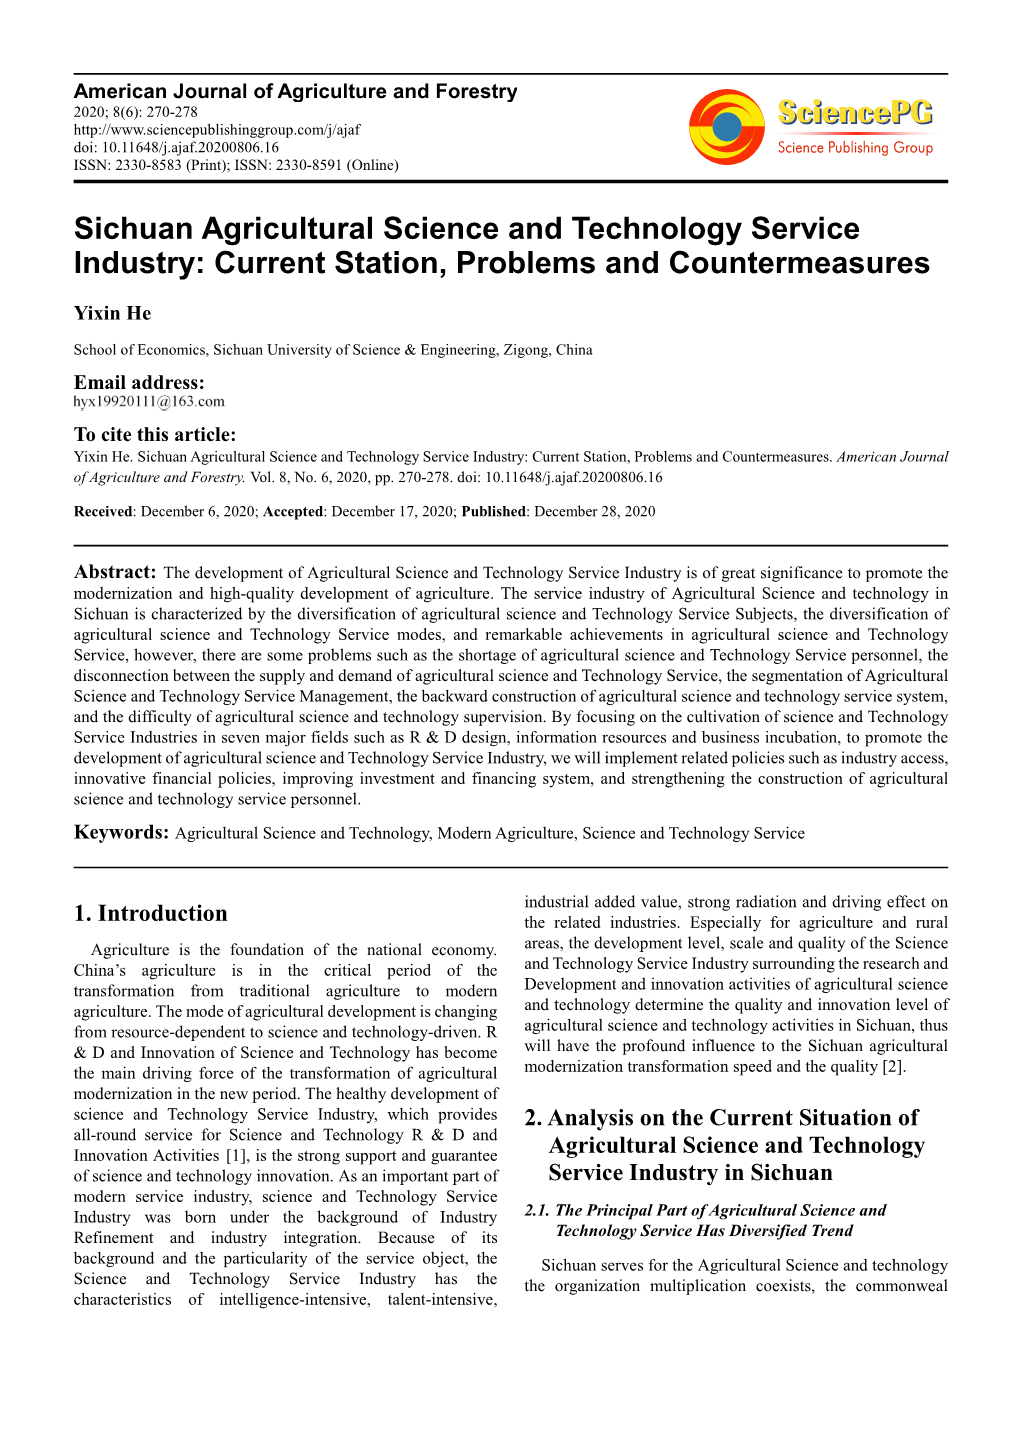 Sichuan Agricultural Science and Technology Service Industry: Current Station, Problems and Countermeasures